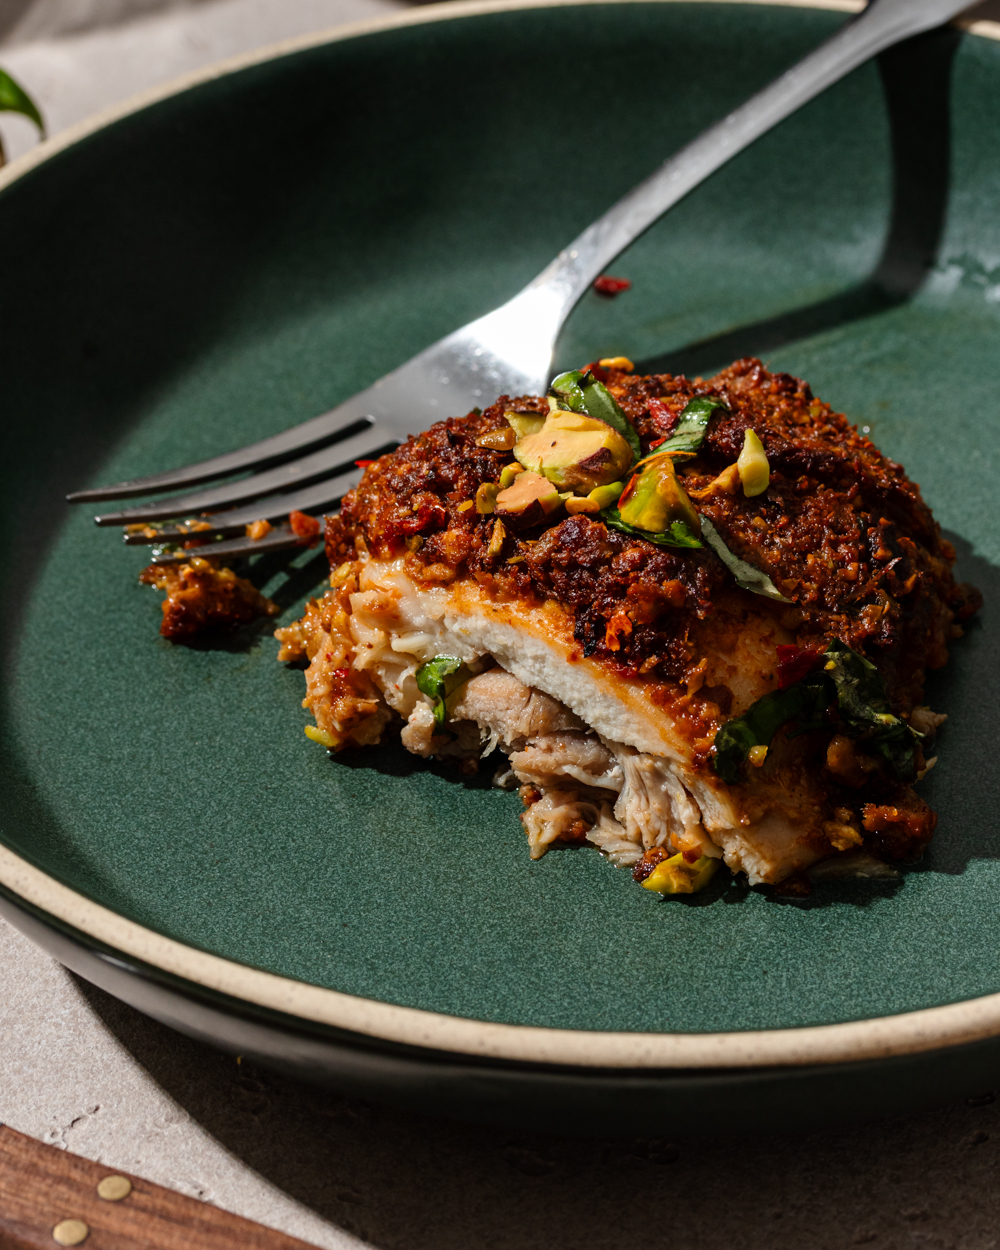 Pistachio crusted chicken on a green plate with a fork.